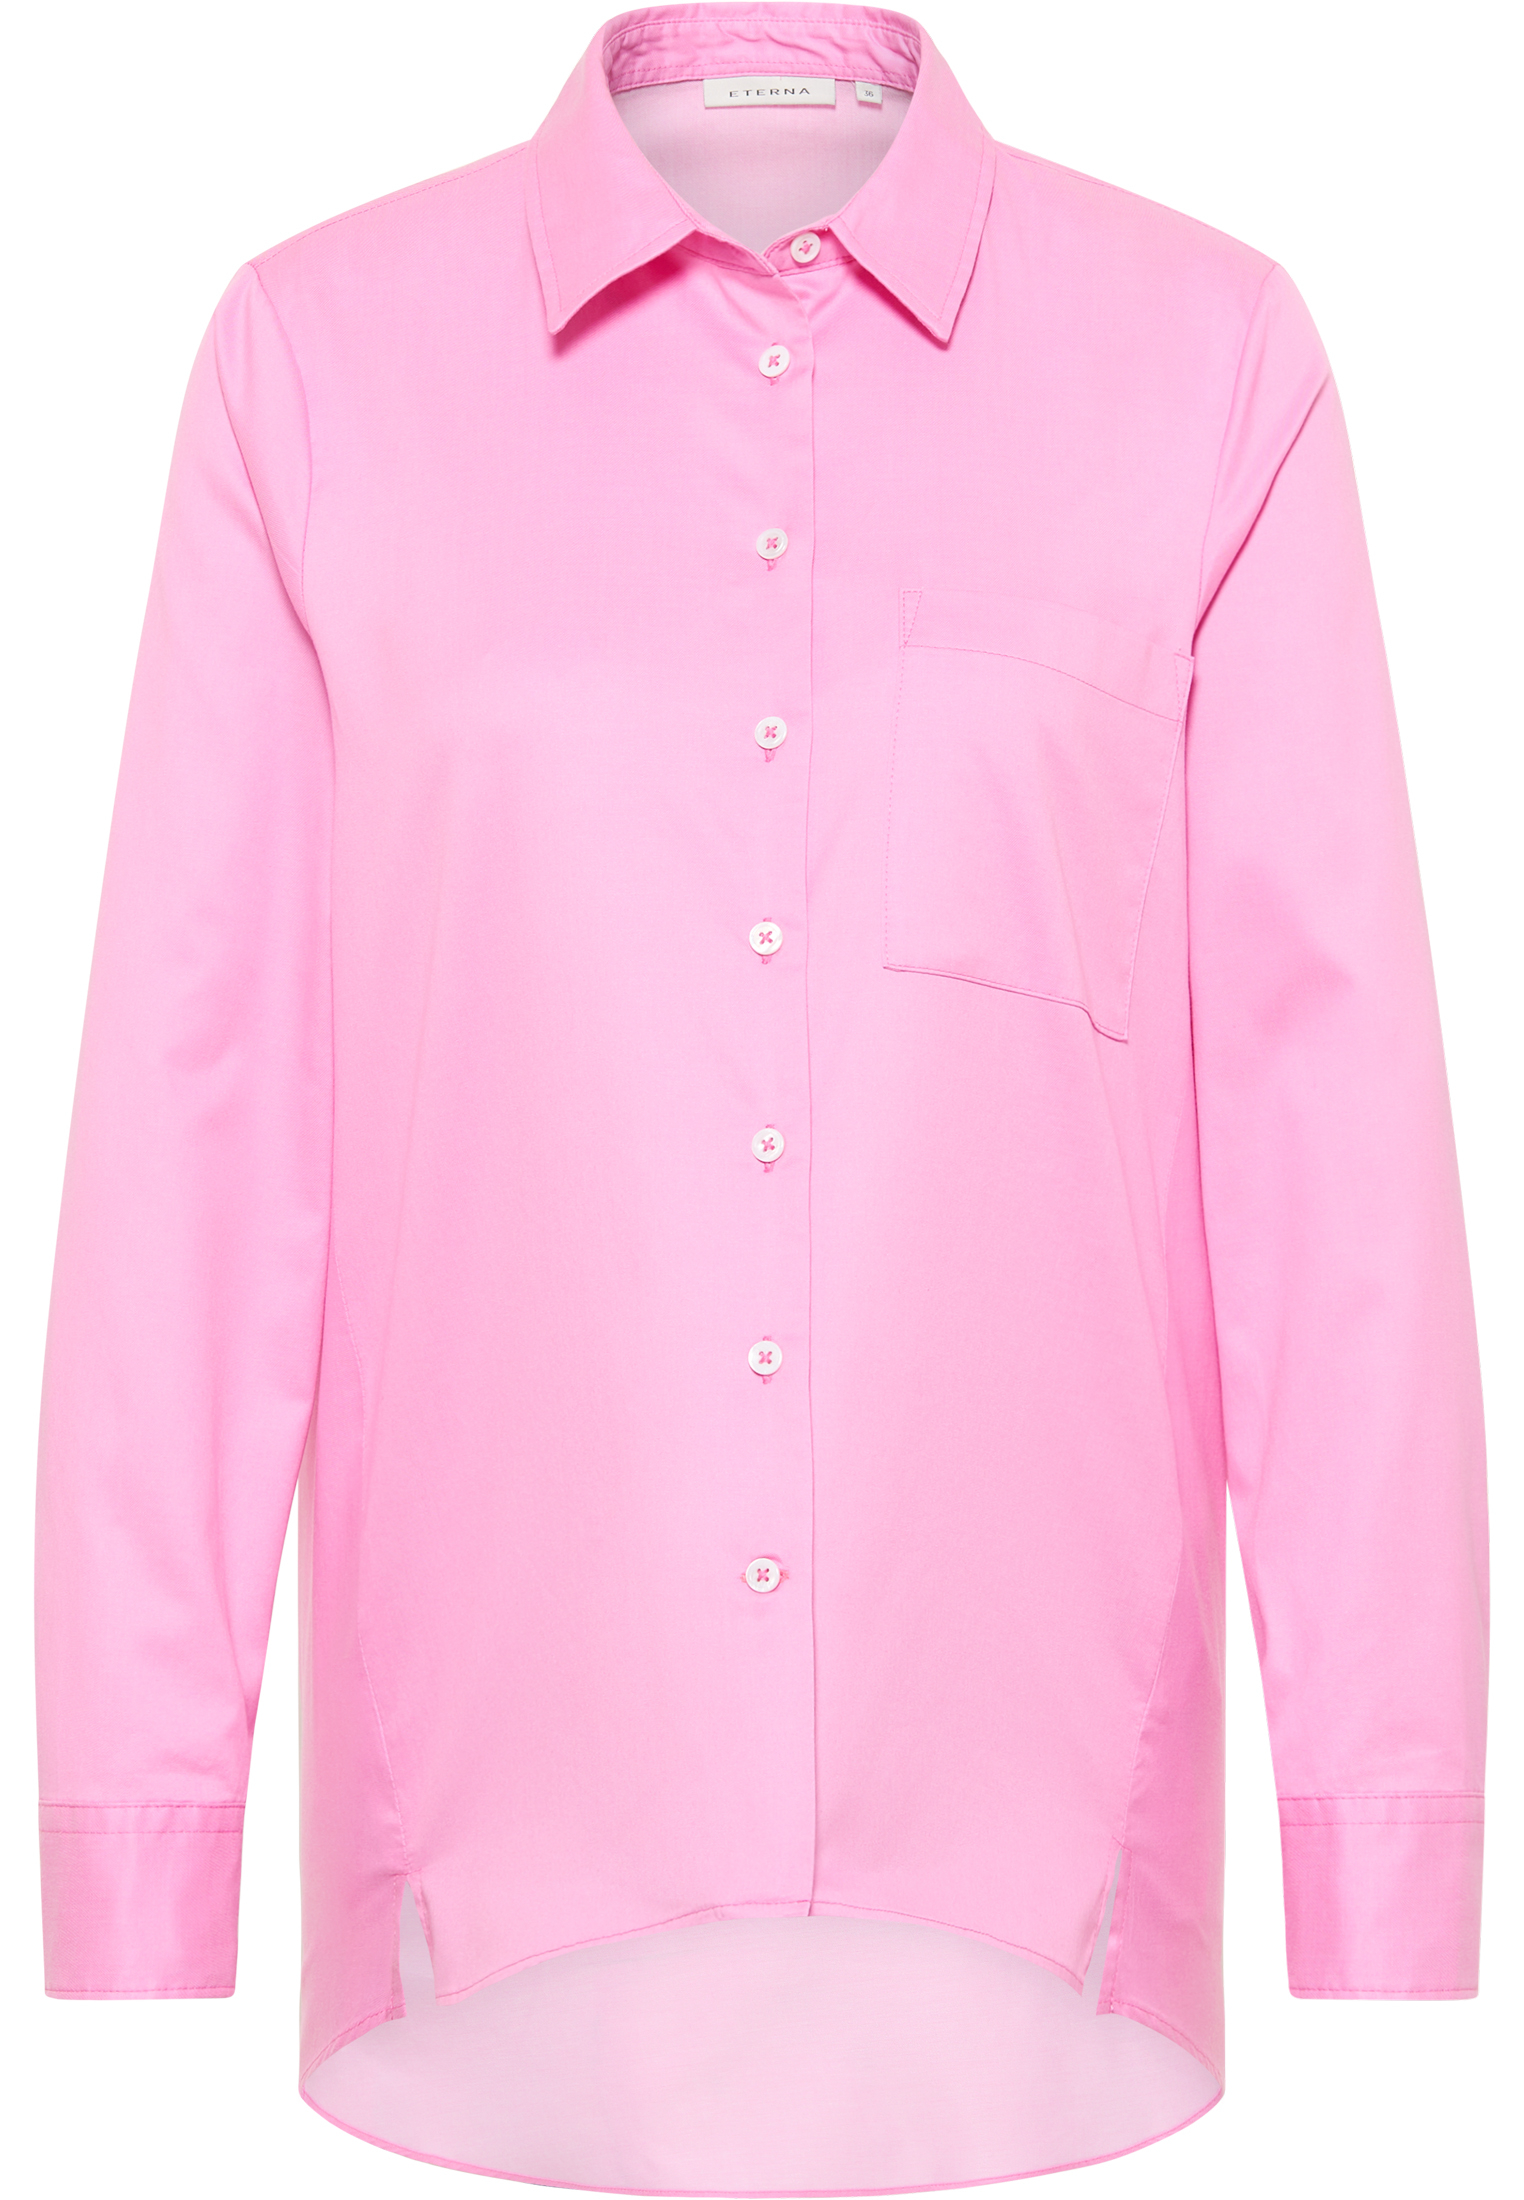 pink pink Blouse Luxury | sleeve in Shirt | 44 Soft | long | plain 2BL03851-15-21-44-1/1